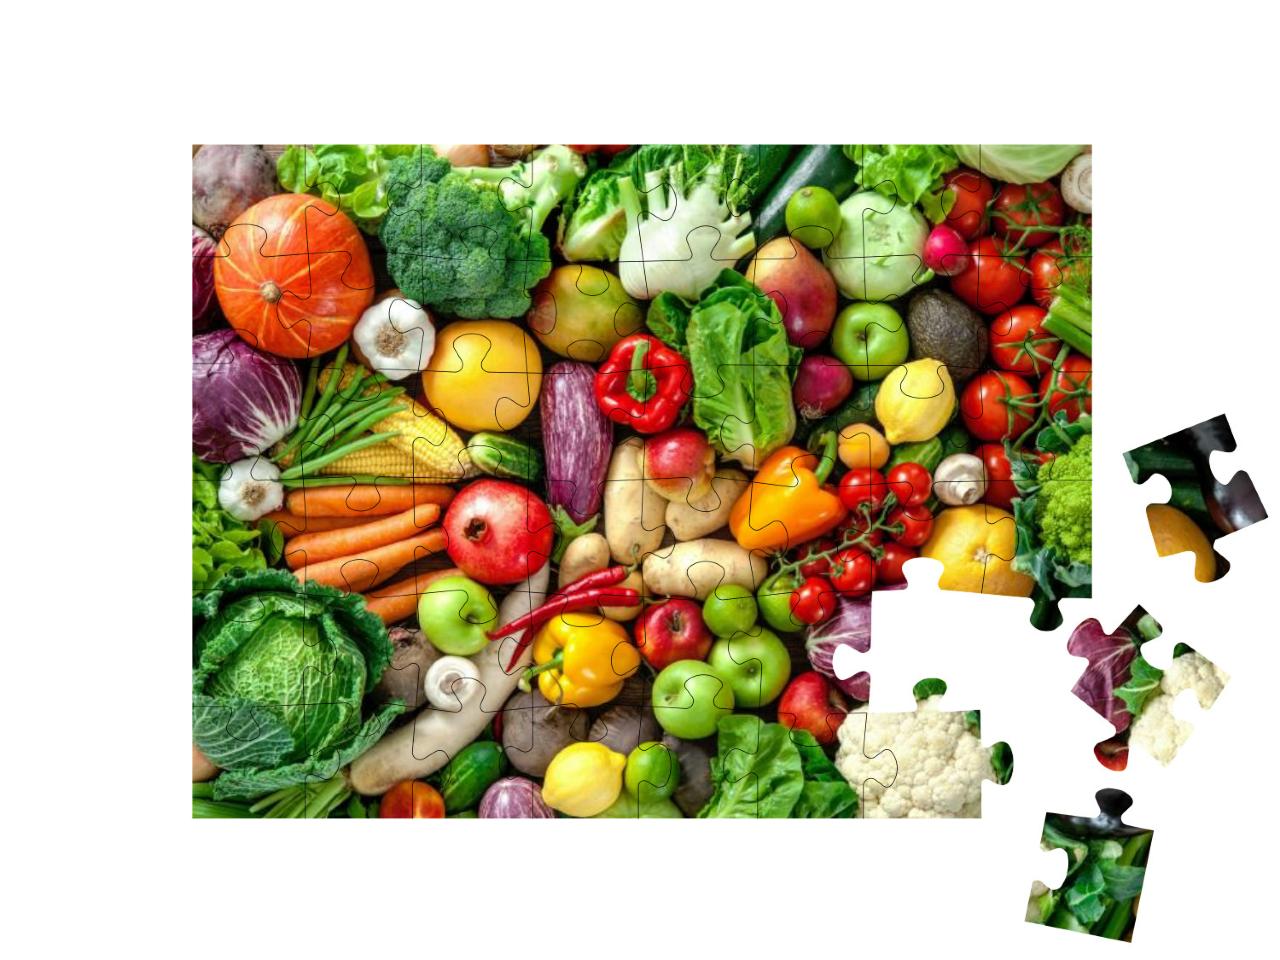 Assortment of Fresh Fruits & Vegetables... Jigsaw Puzzle with 48 pieces